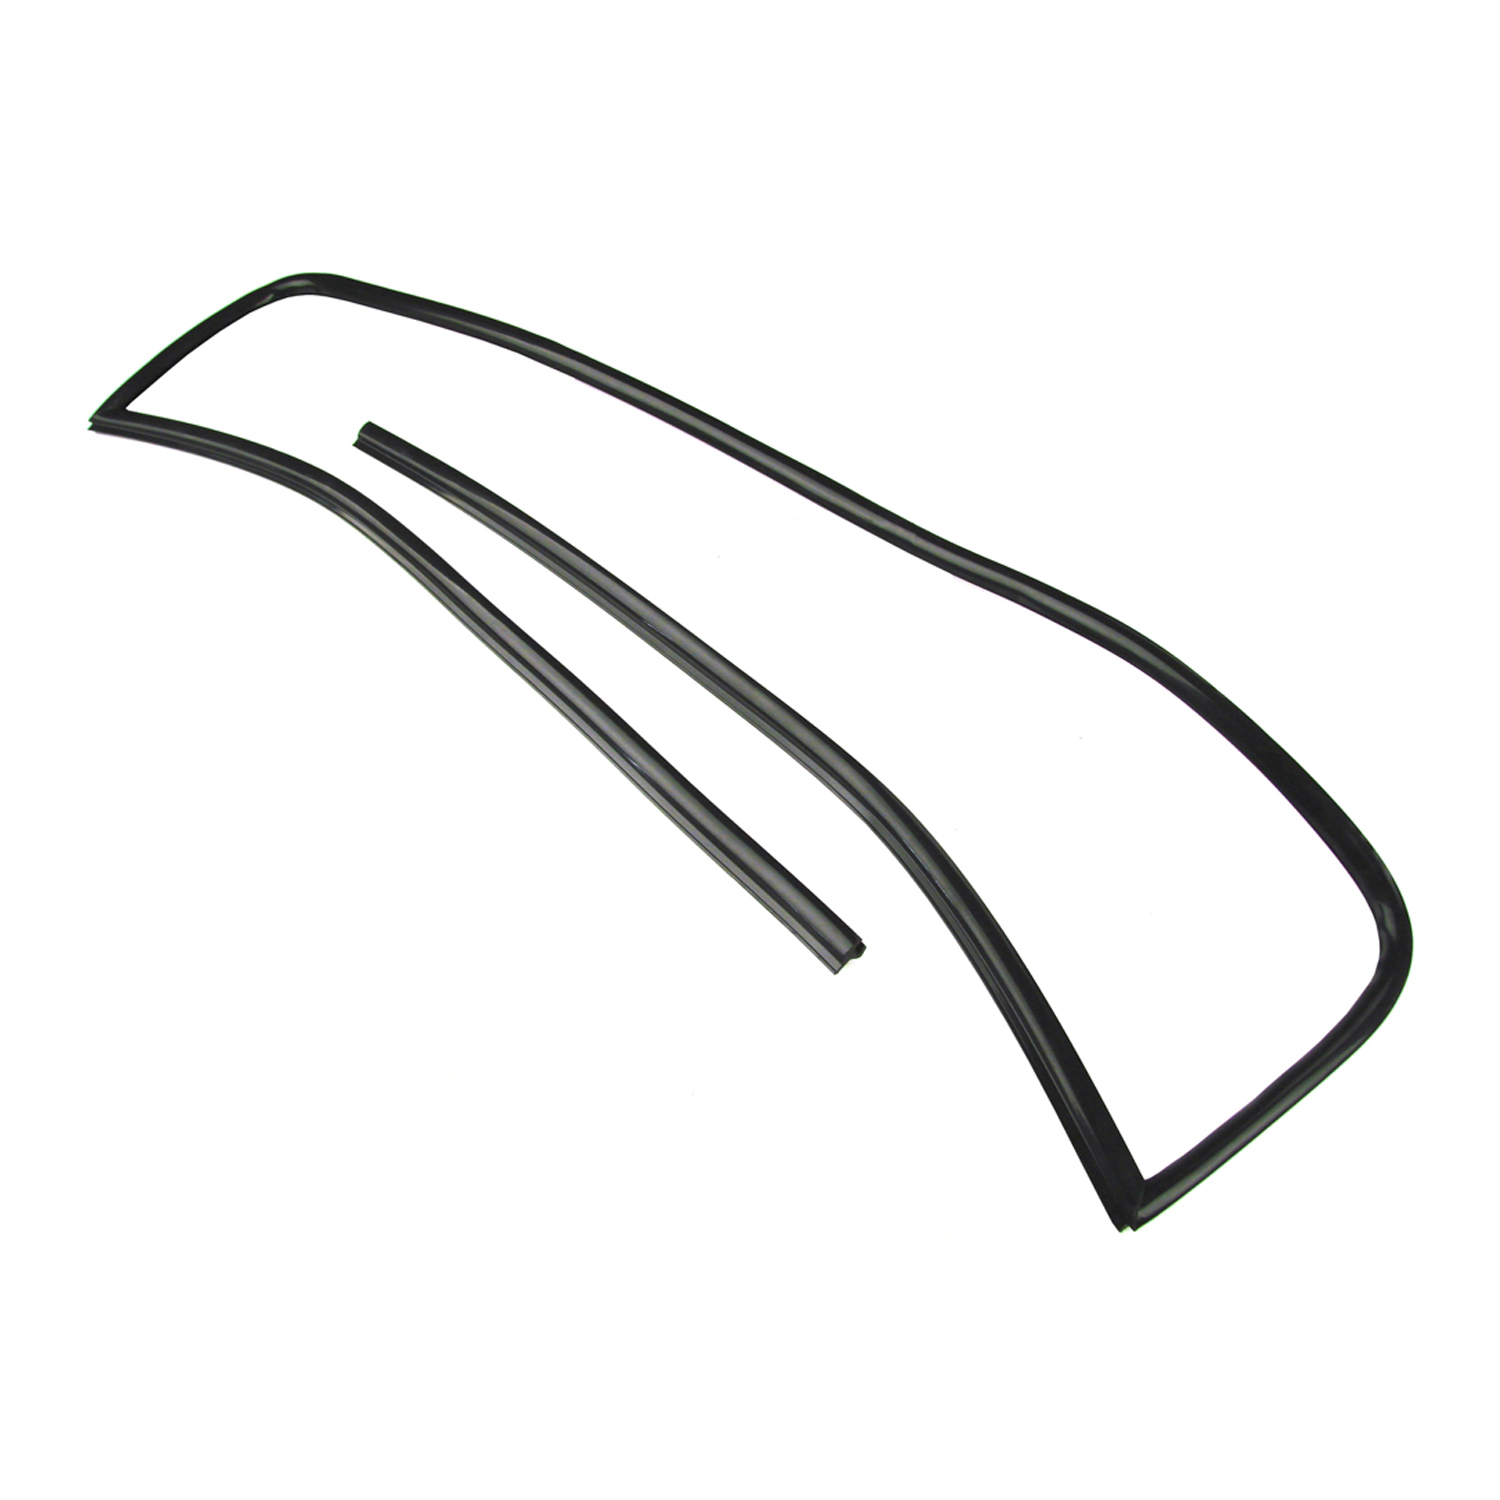 1999 Chevrolet Camaro Windshield Seal, 93-02 GM F Body Coupe Without T-Top Option, Each-VWS 1967-M